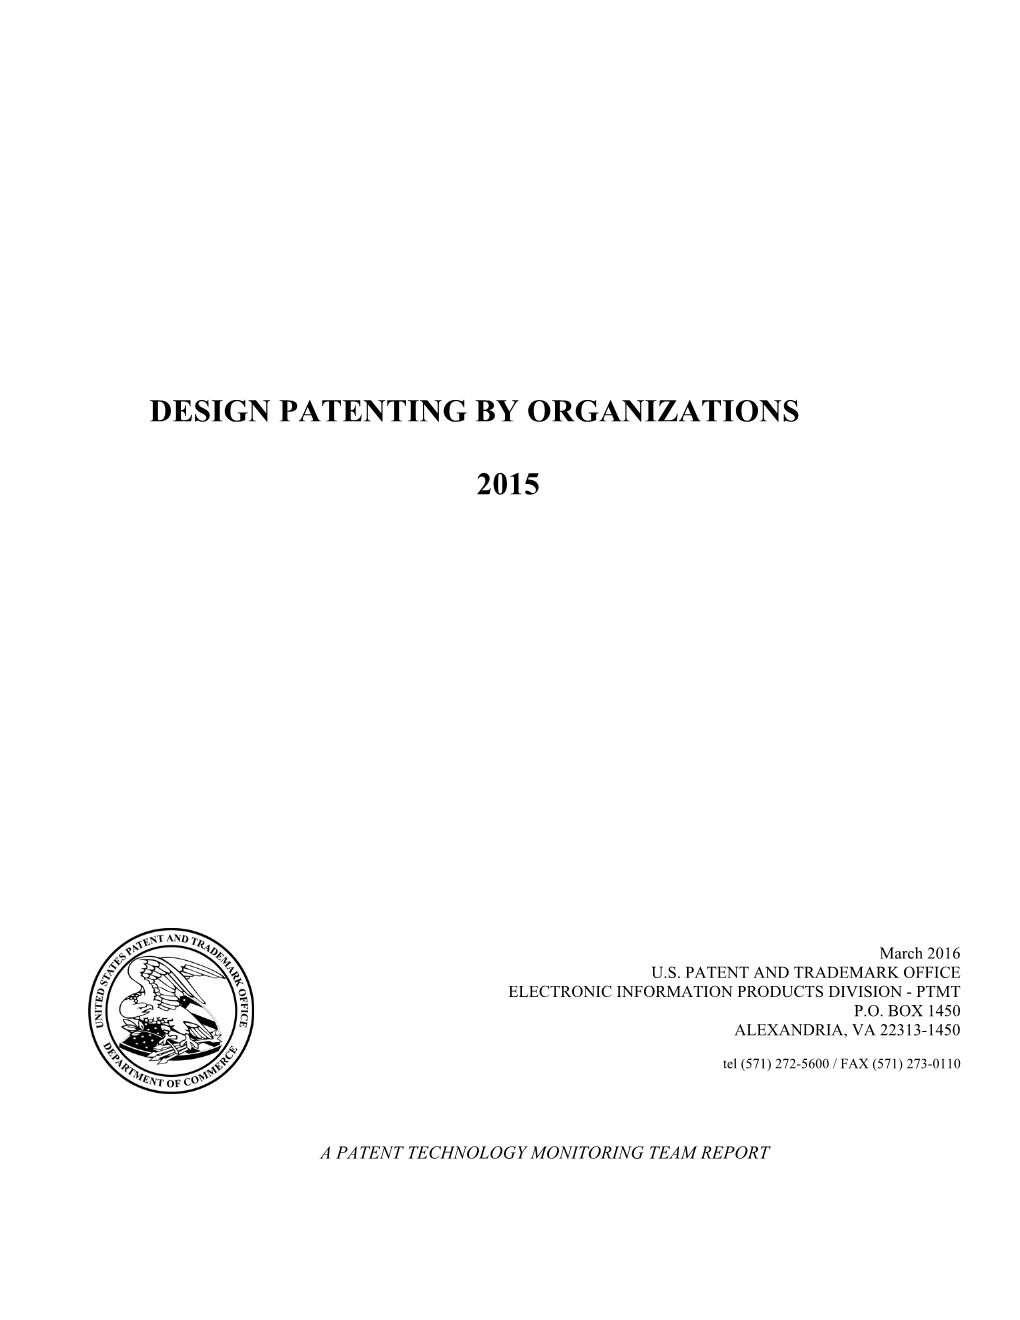 Design Patenting by Organizations 2015